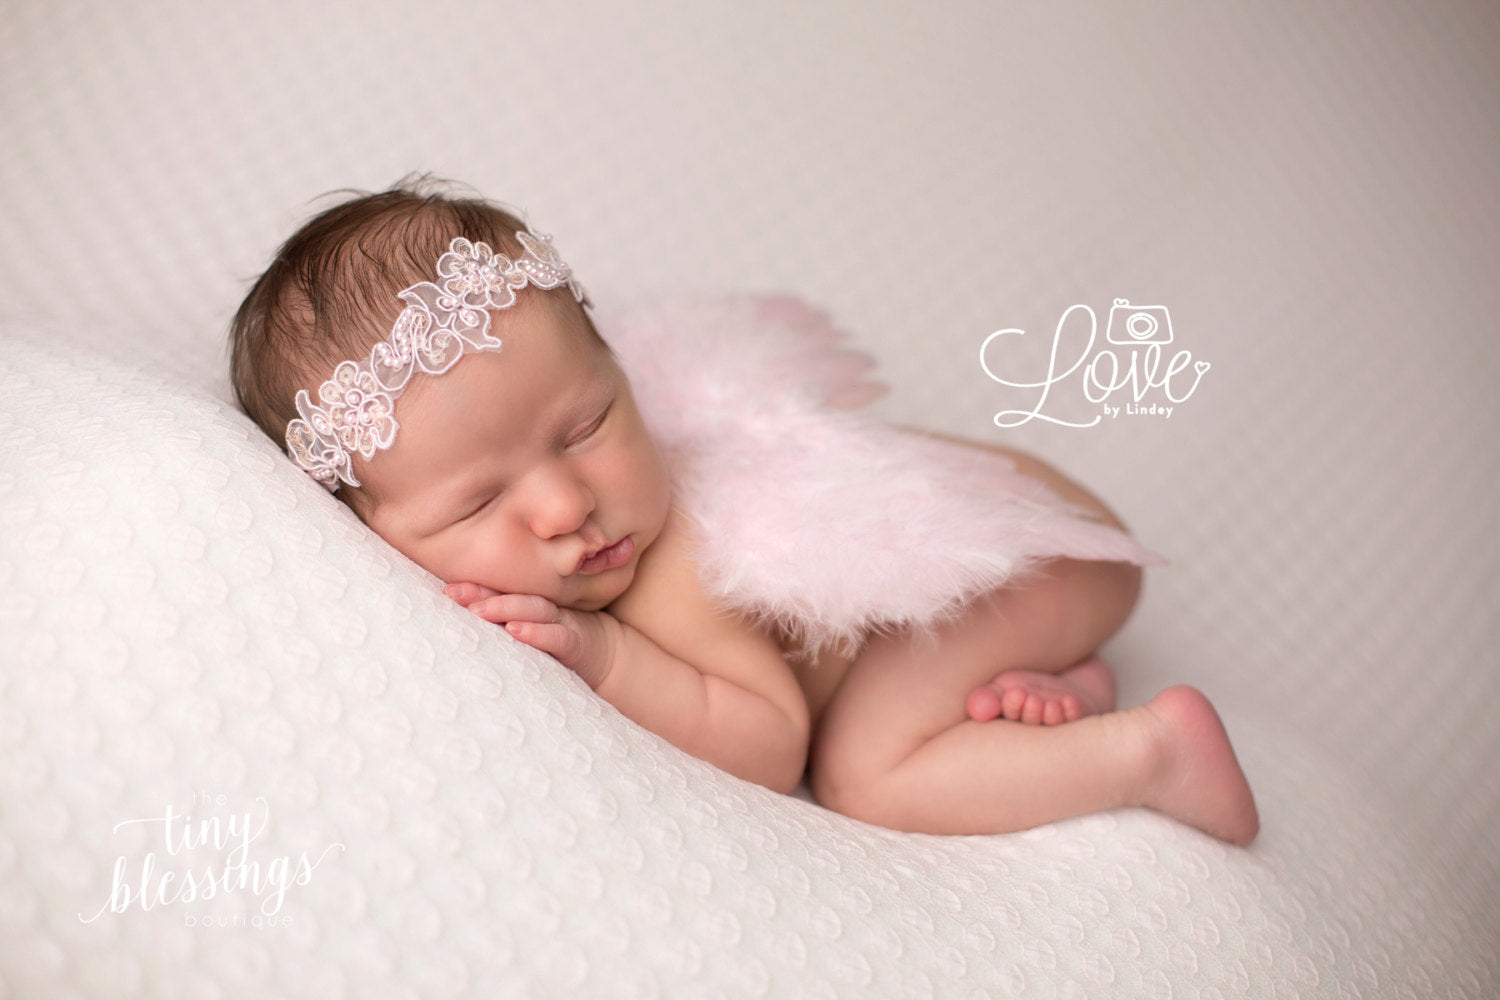 Baby Pink Angel Baby Wing and Baby Beaded Lace Headband Set